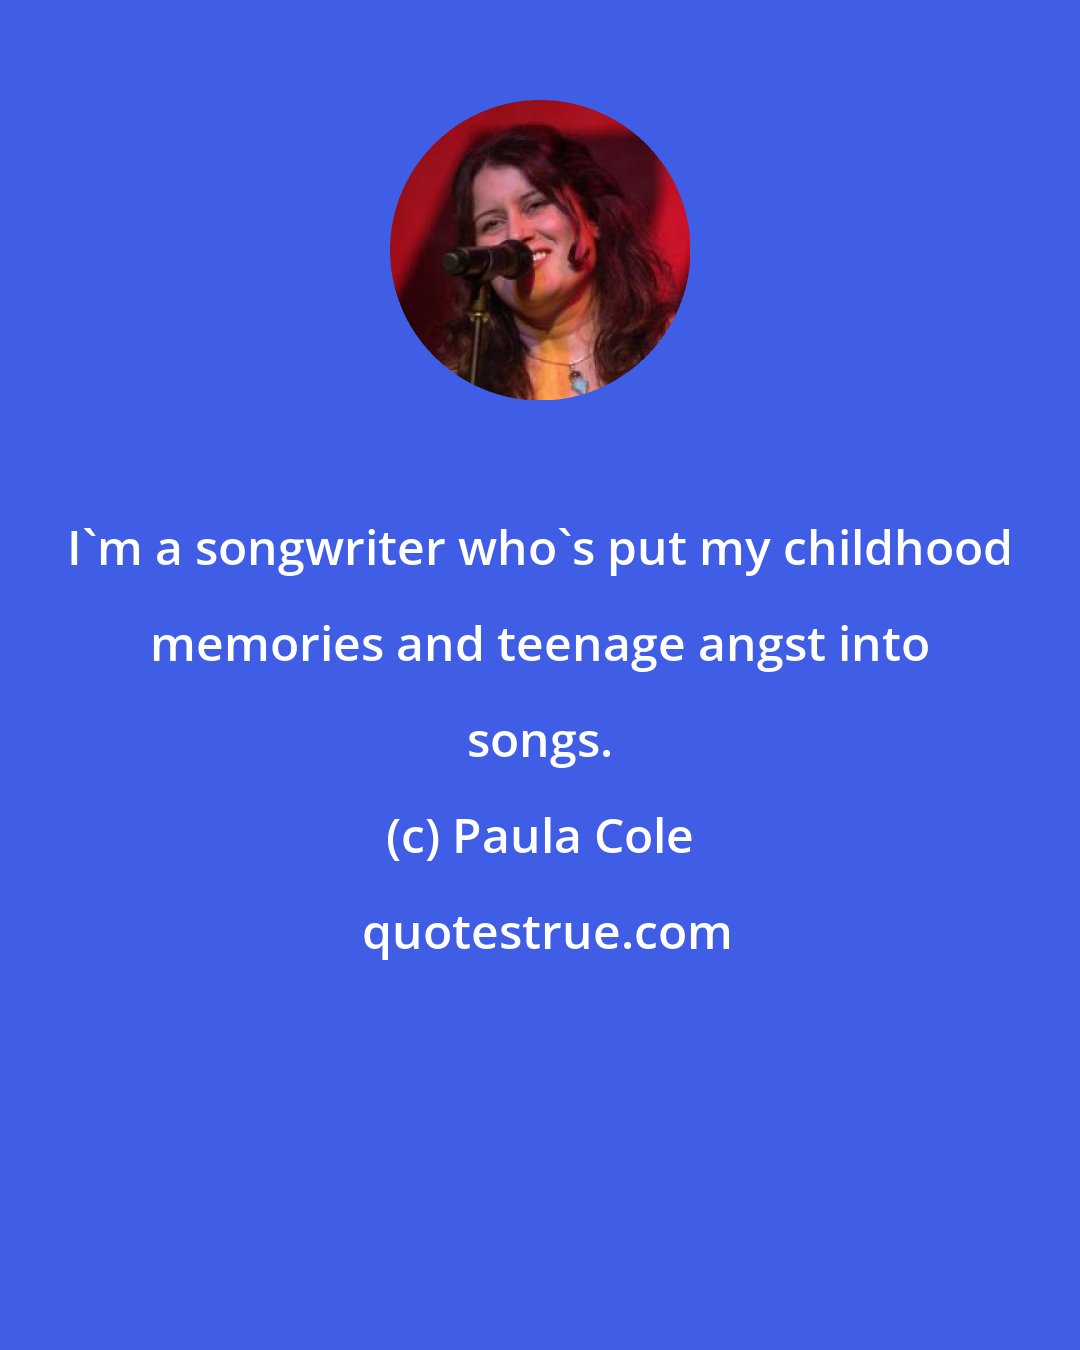 Paula Cole: I'm a songwriter who's put my childhood memories and teenage angst into songs.